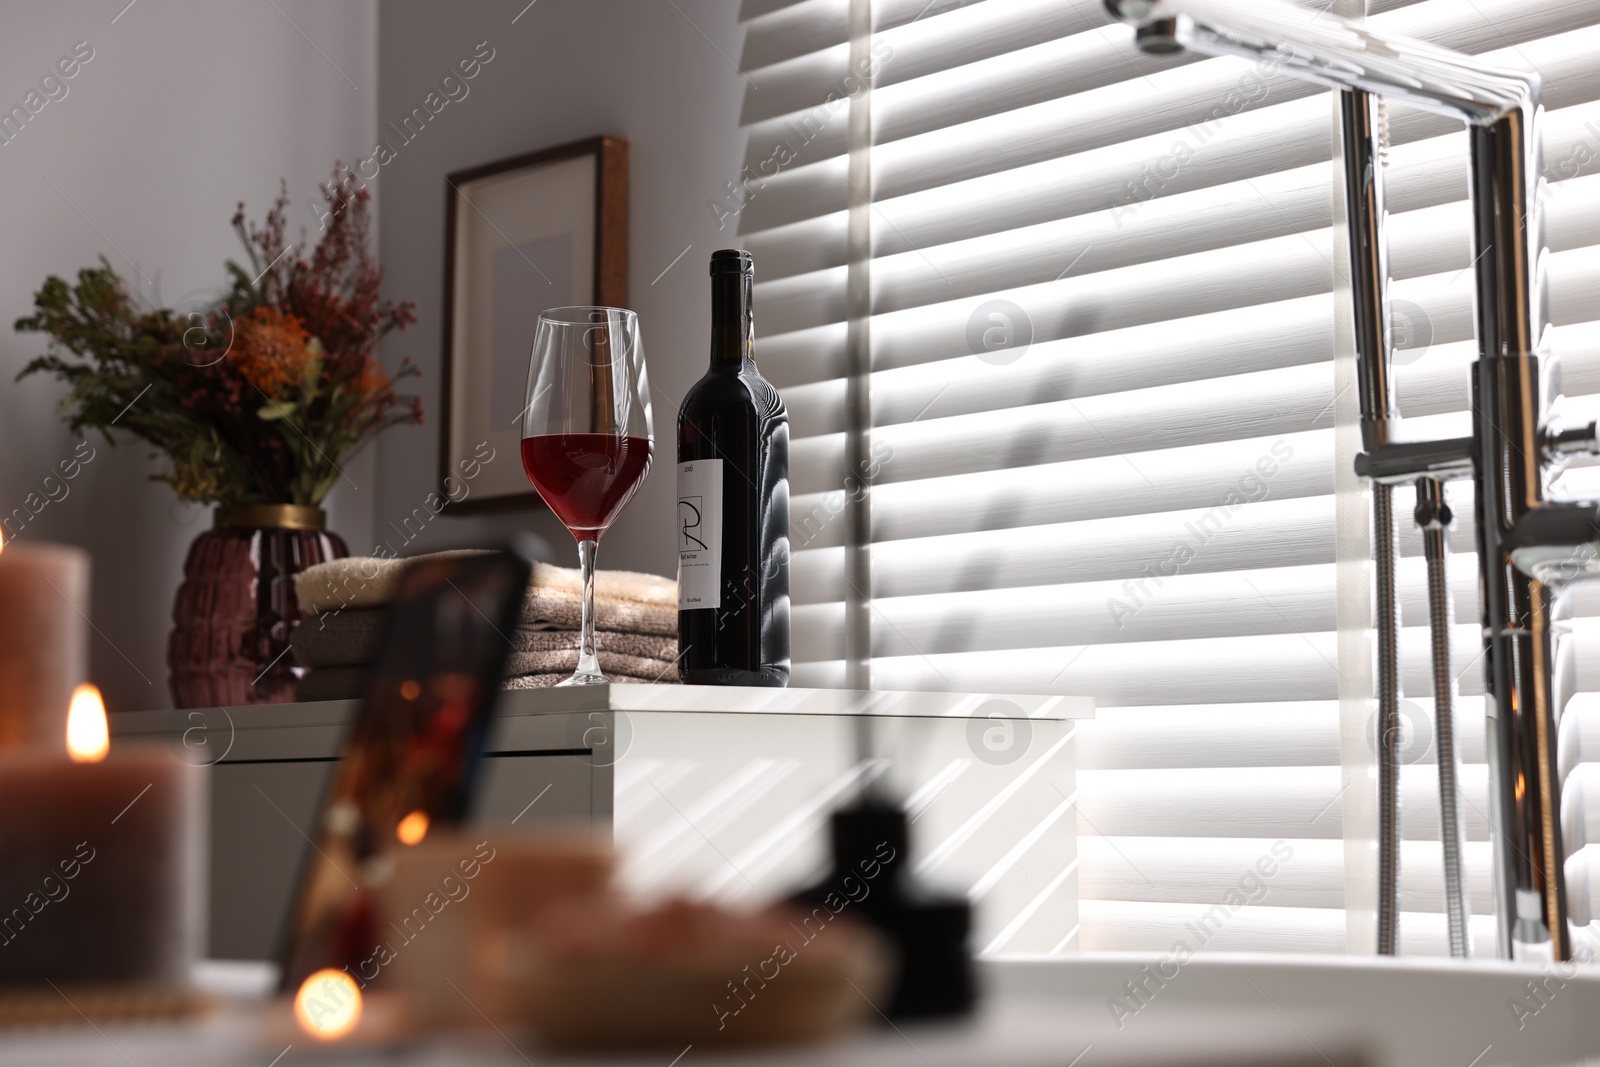 Photo of Bottle of wine, towels and flowers on chest of drawers in bathroom, selective focus